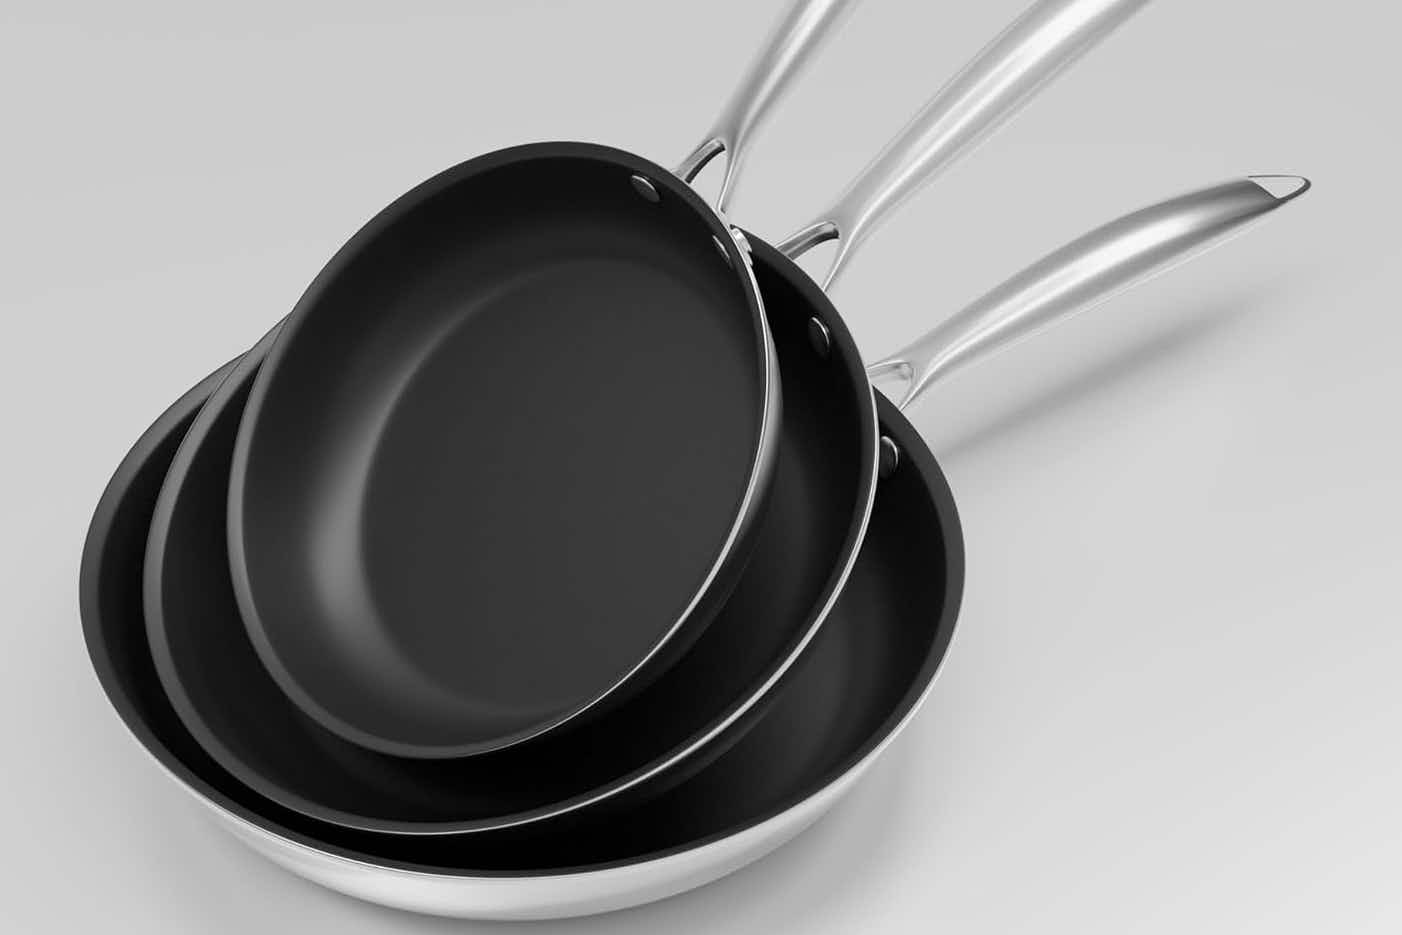 Stainless Steel Nonstick Frying Pan Set, Just $49.50 With Amazon Promo Code